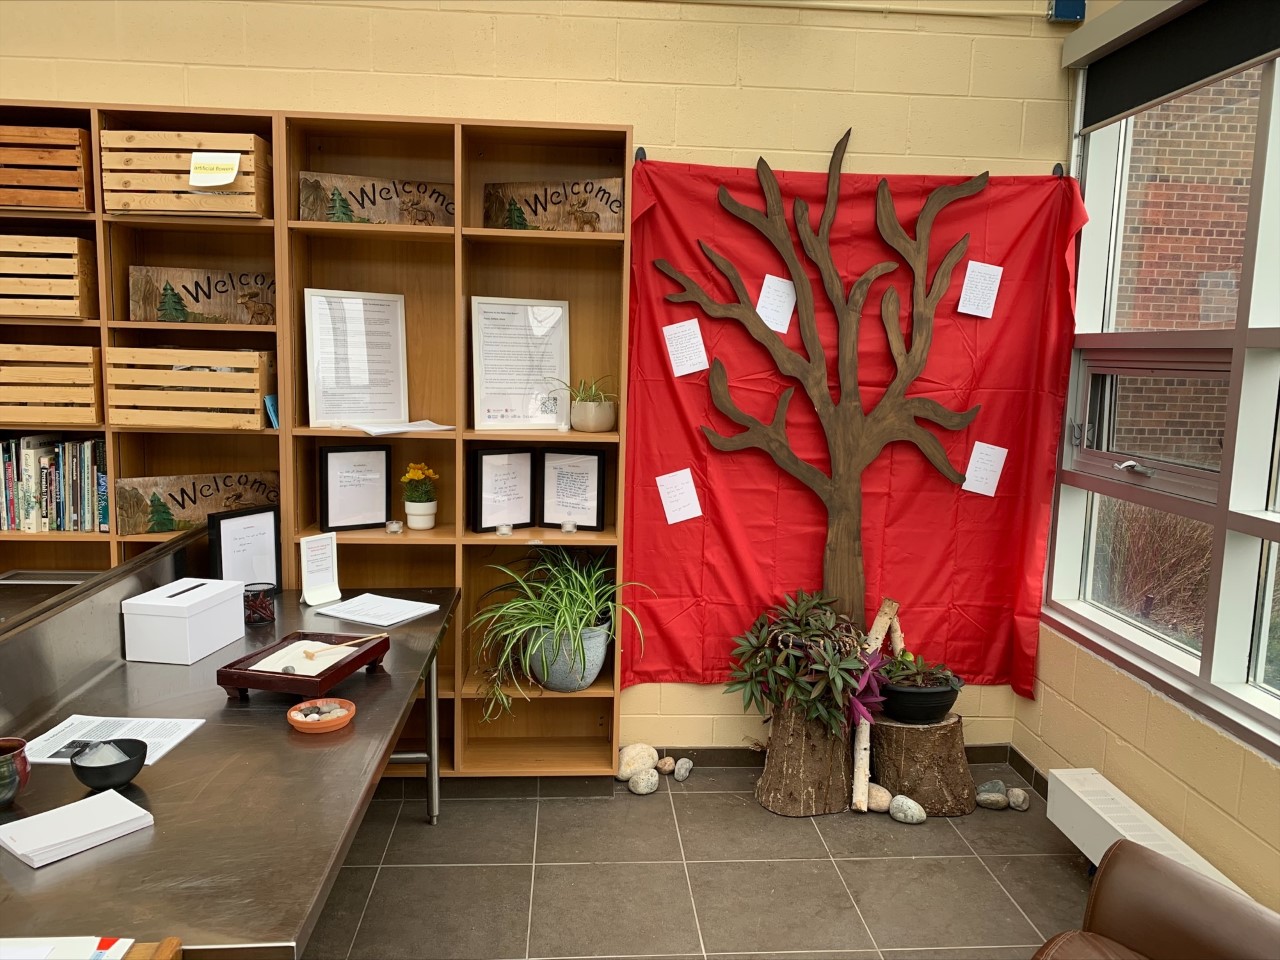 a photo of the reflection room, a table with writing supplies and a red cloth hanging on the wall with a tree and peoples' written memories and reflections on grief posted on the sheet around the tree.